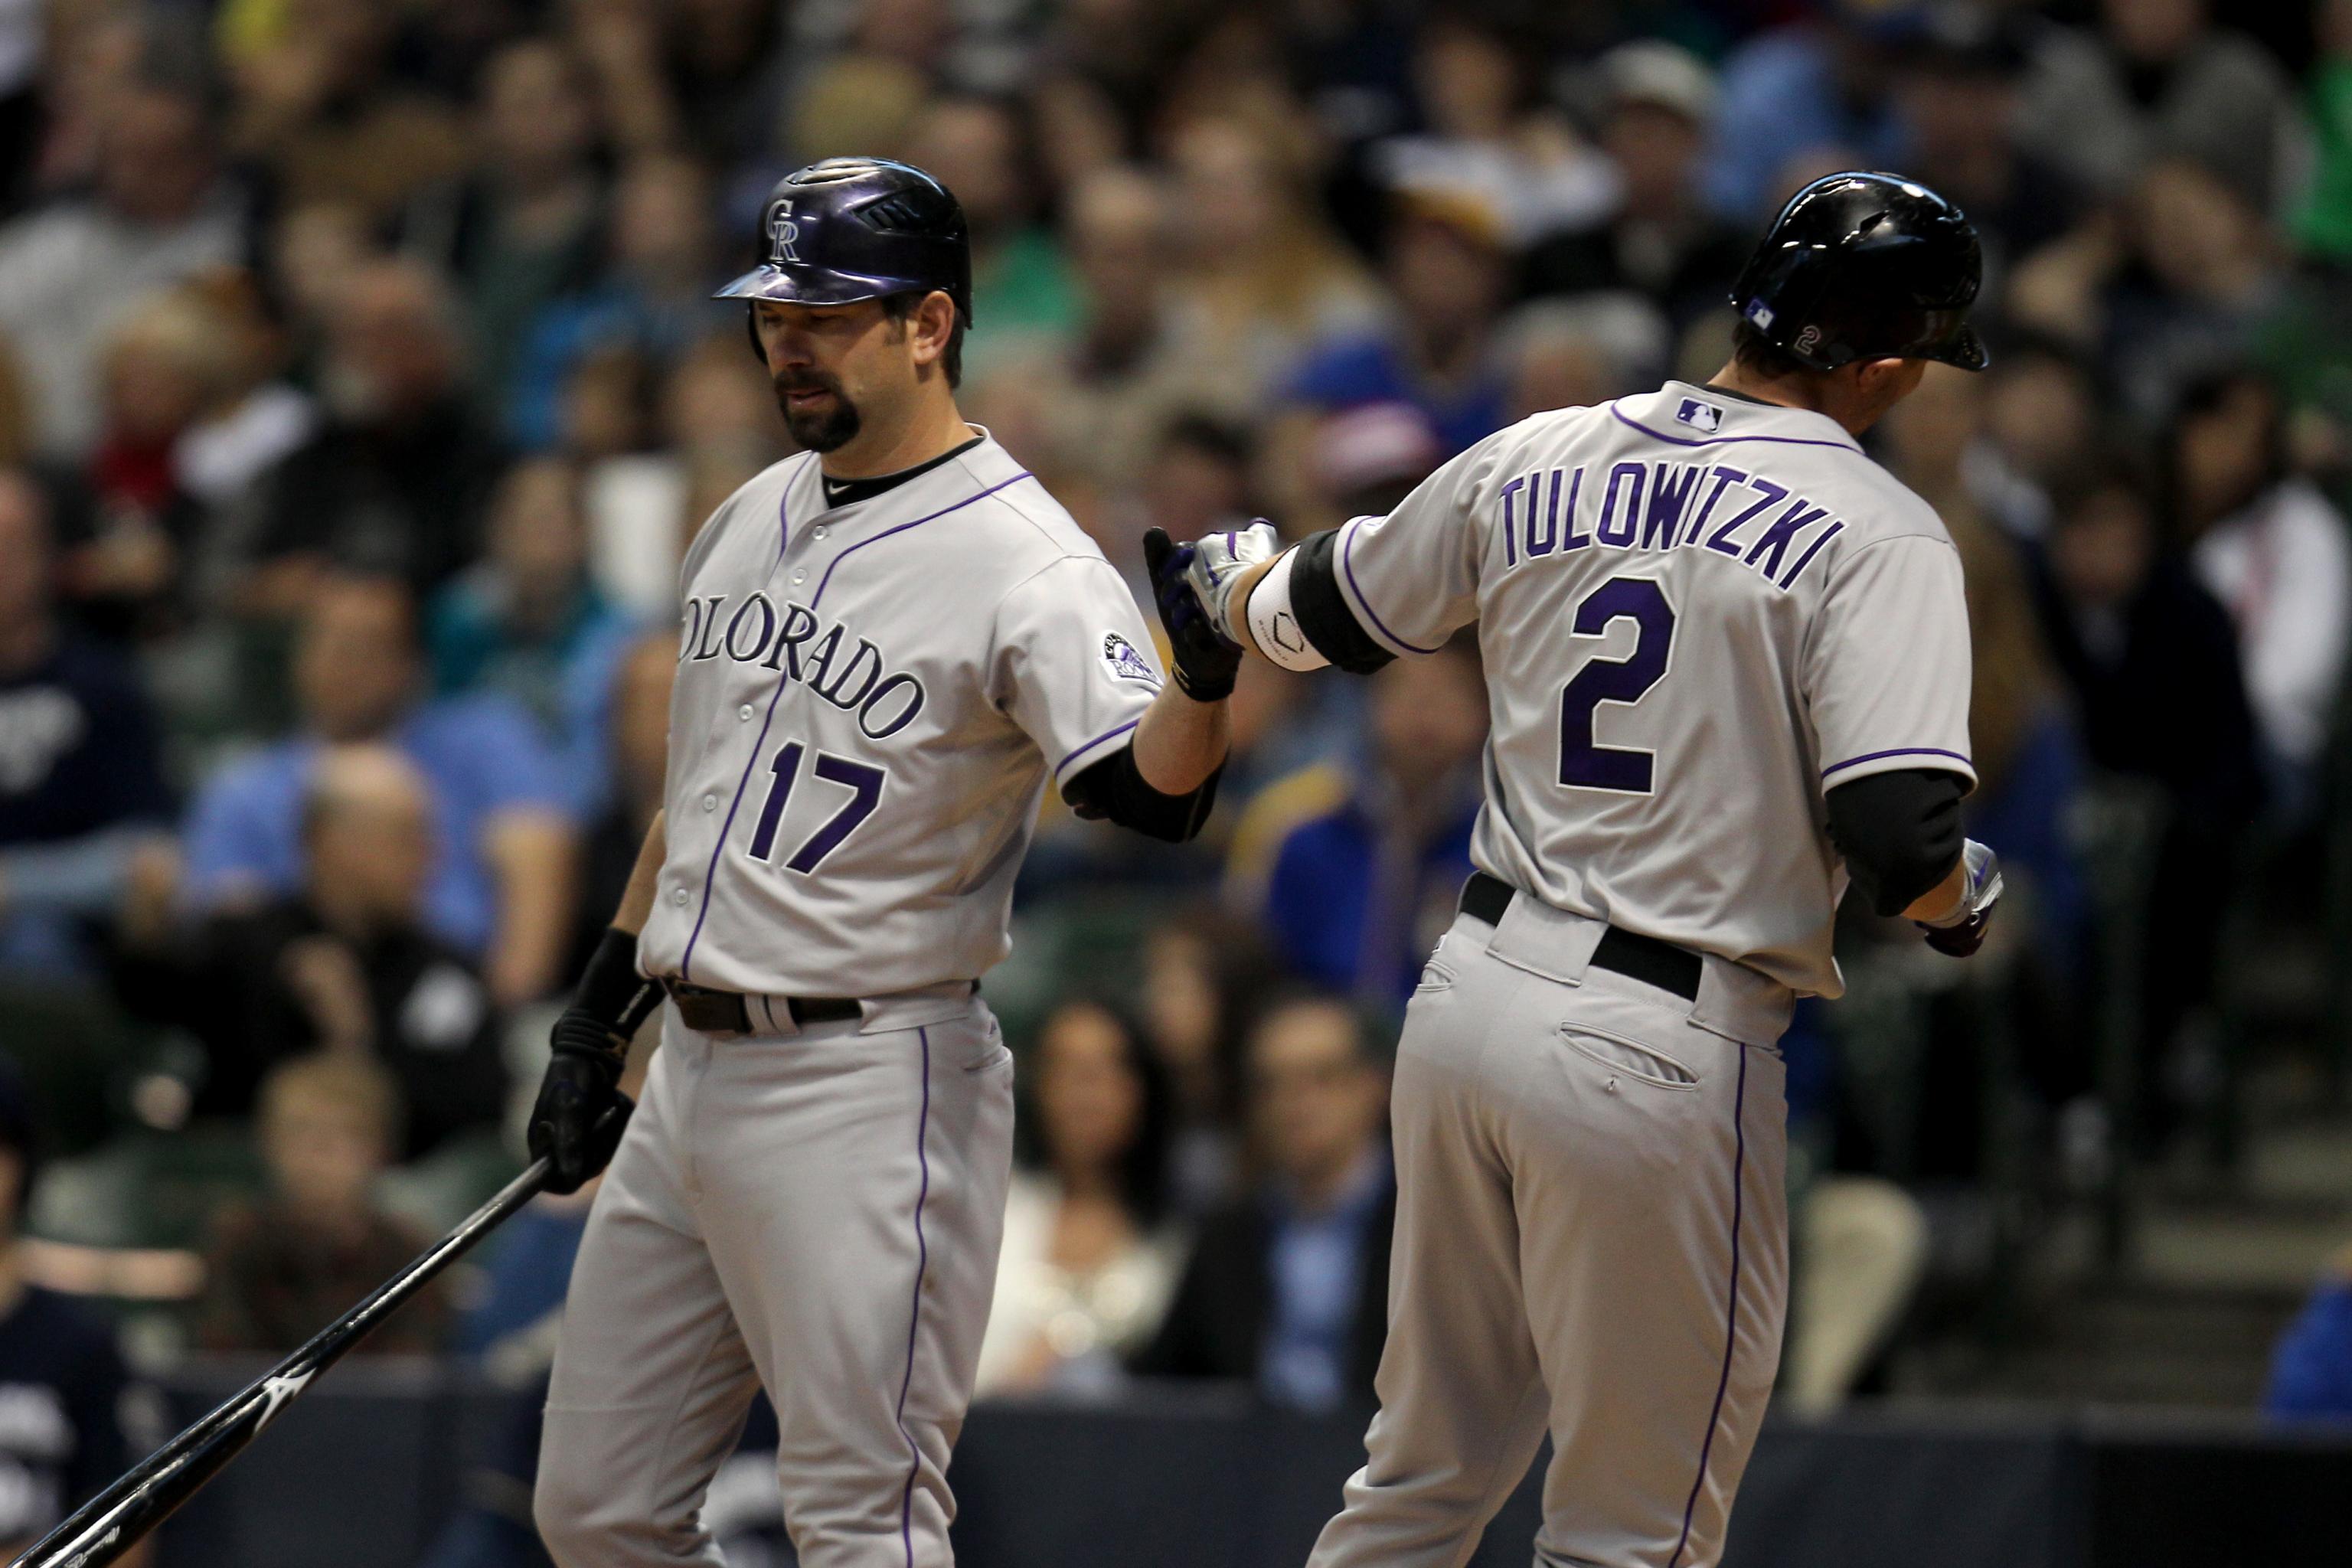 Rockies Mailbag: Rox early surprises, MLB expansion, 2022 all-stars